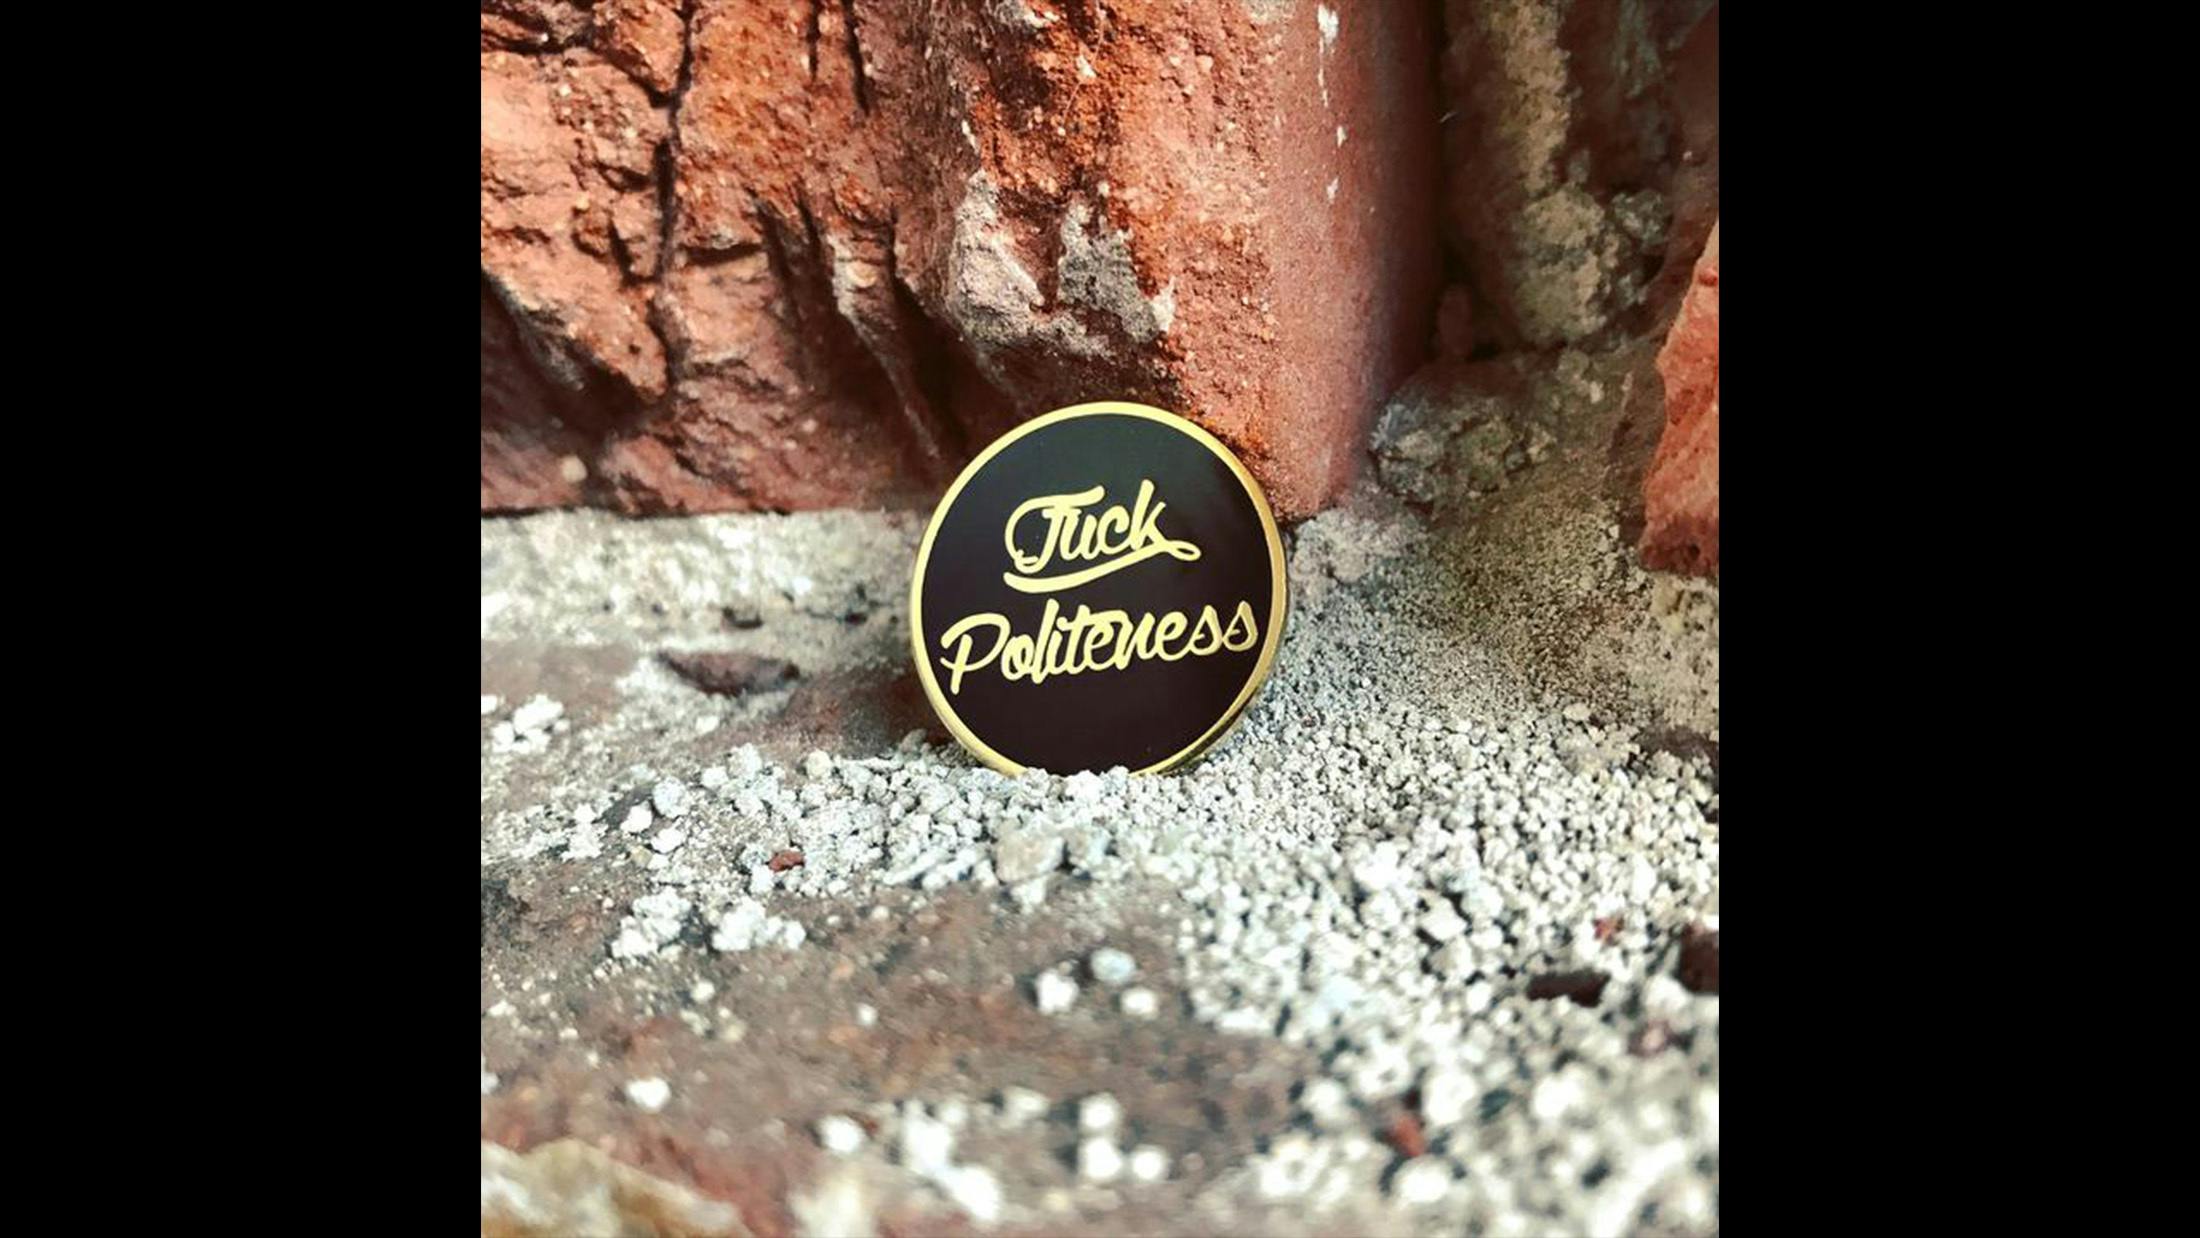 Just in case your jacket is looking a little bare or maybe it’s simply lacking the finishing touch, this Fuck Politeness pin should do the trick.

$10.00 / £8.42

http://bit.ly/2DiWQA7